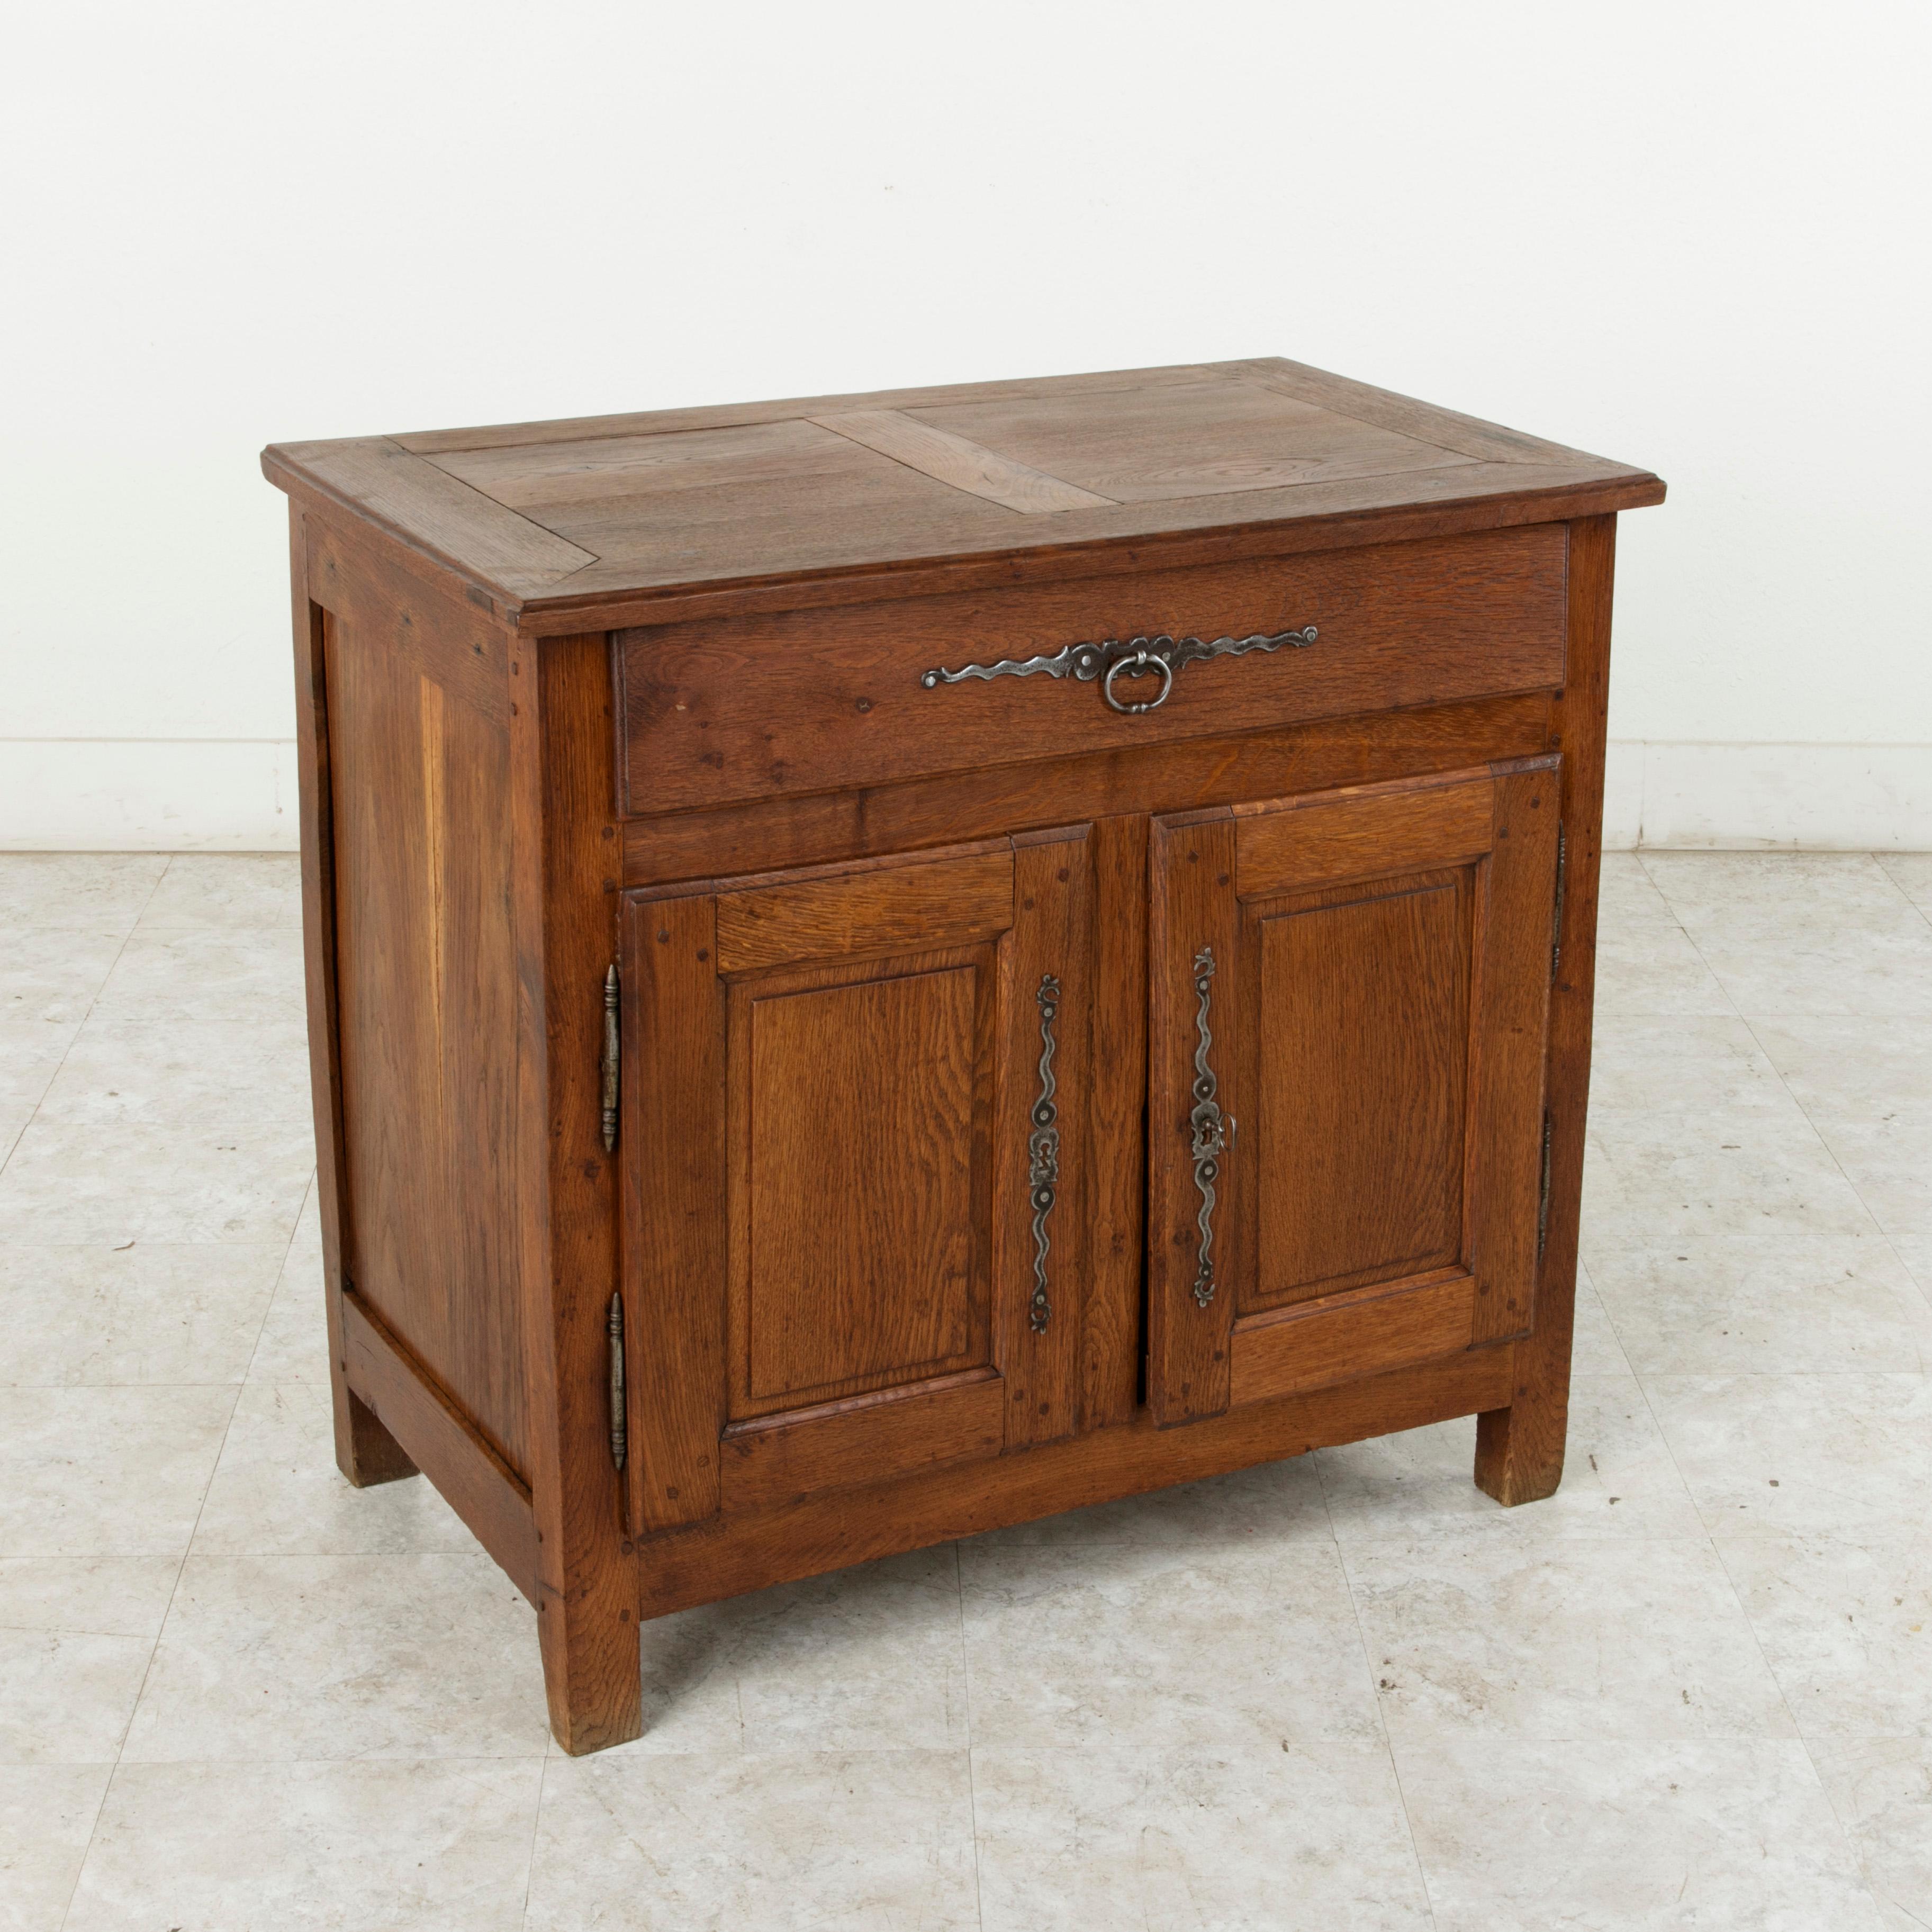 Originally used in the convent in the village of Verneuil-sur-Avre, in the region of Normandy, France, this small-scale French Louis XIV style oak buffet or sideboard from the mid-19th century features panelled sides of hand pegged mortise and tenon